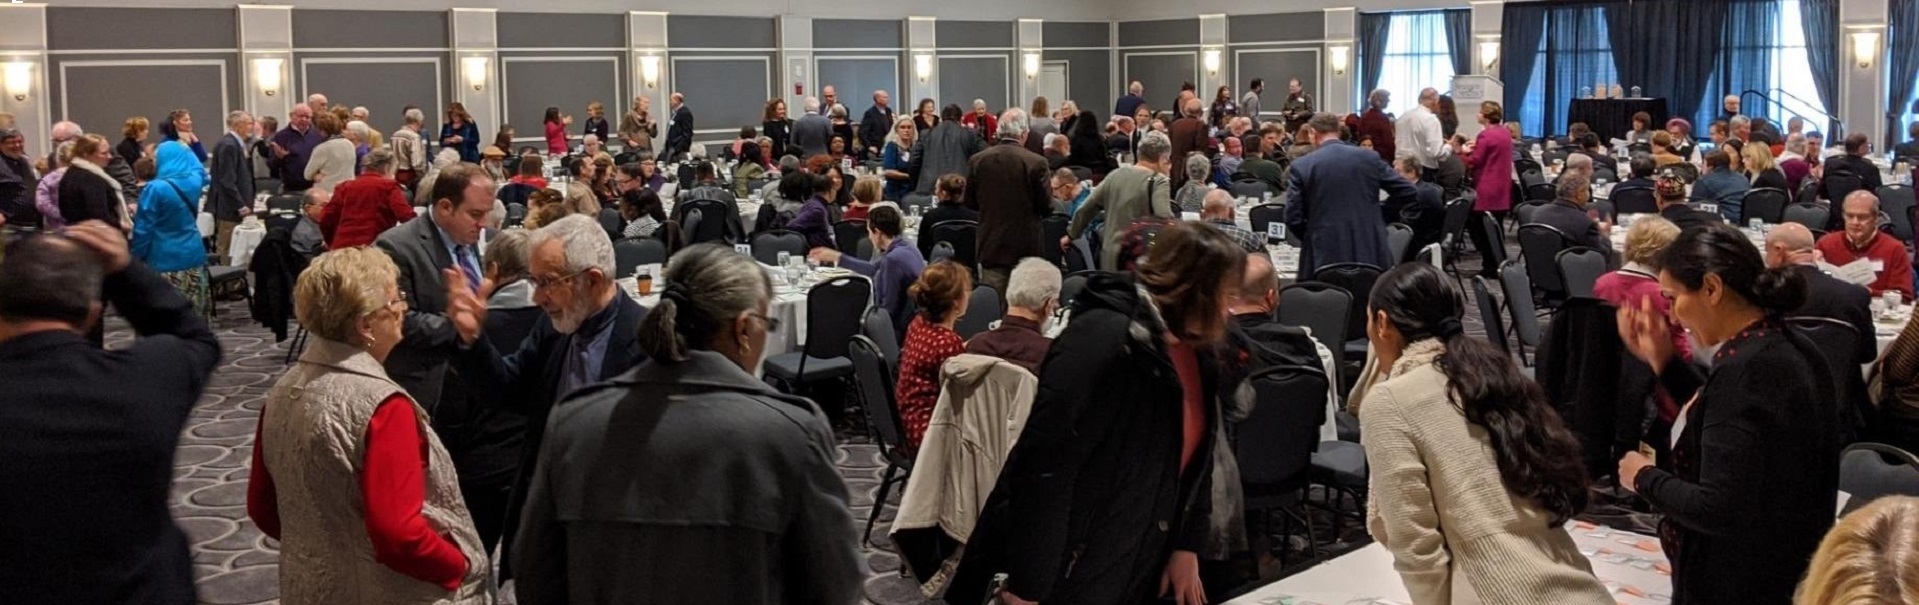 Interfaith Conference Luncheon 2019